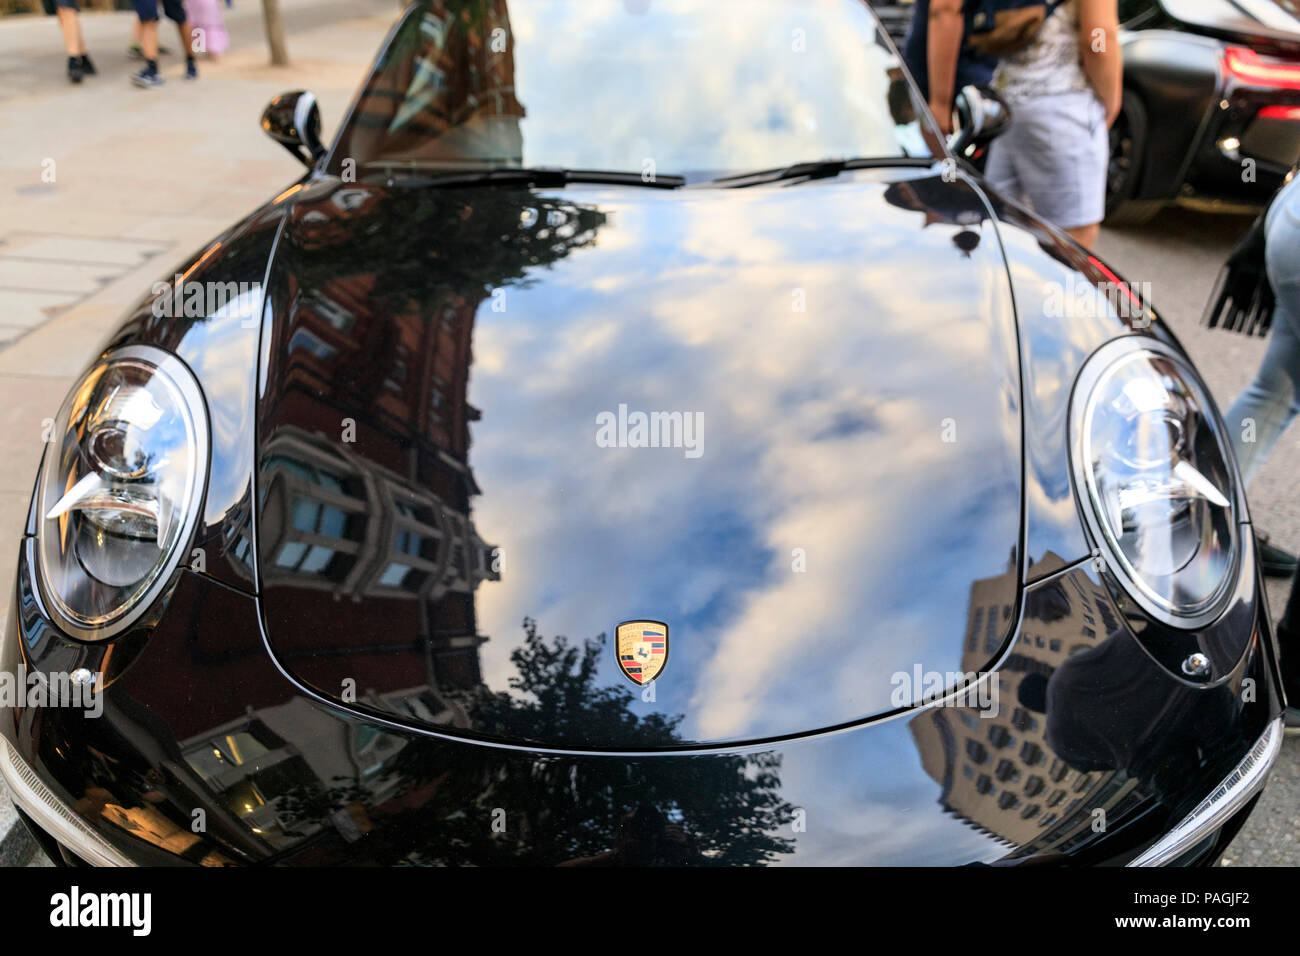 Supercars In London - Sloane Street in the Summer!! 